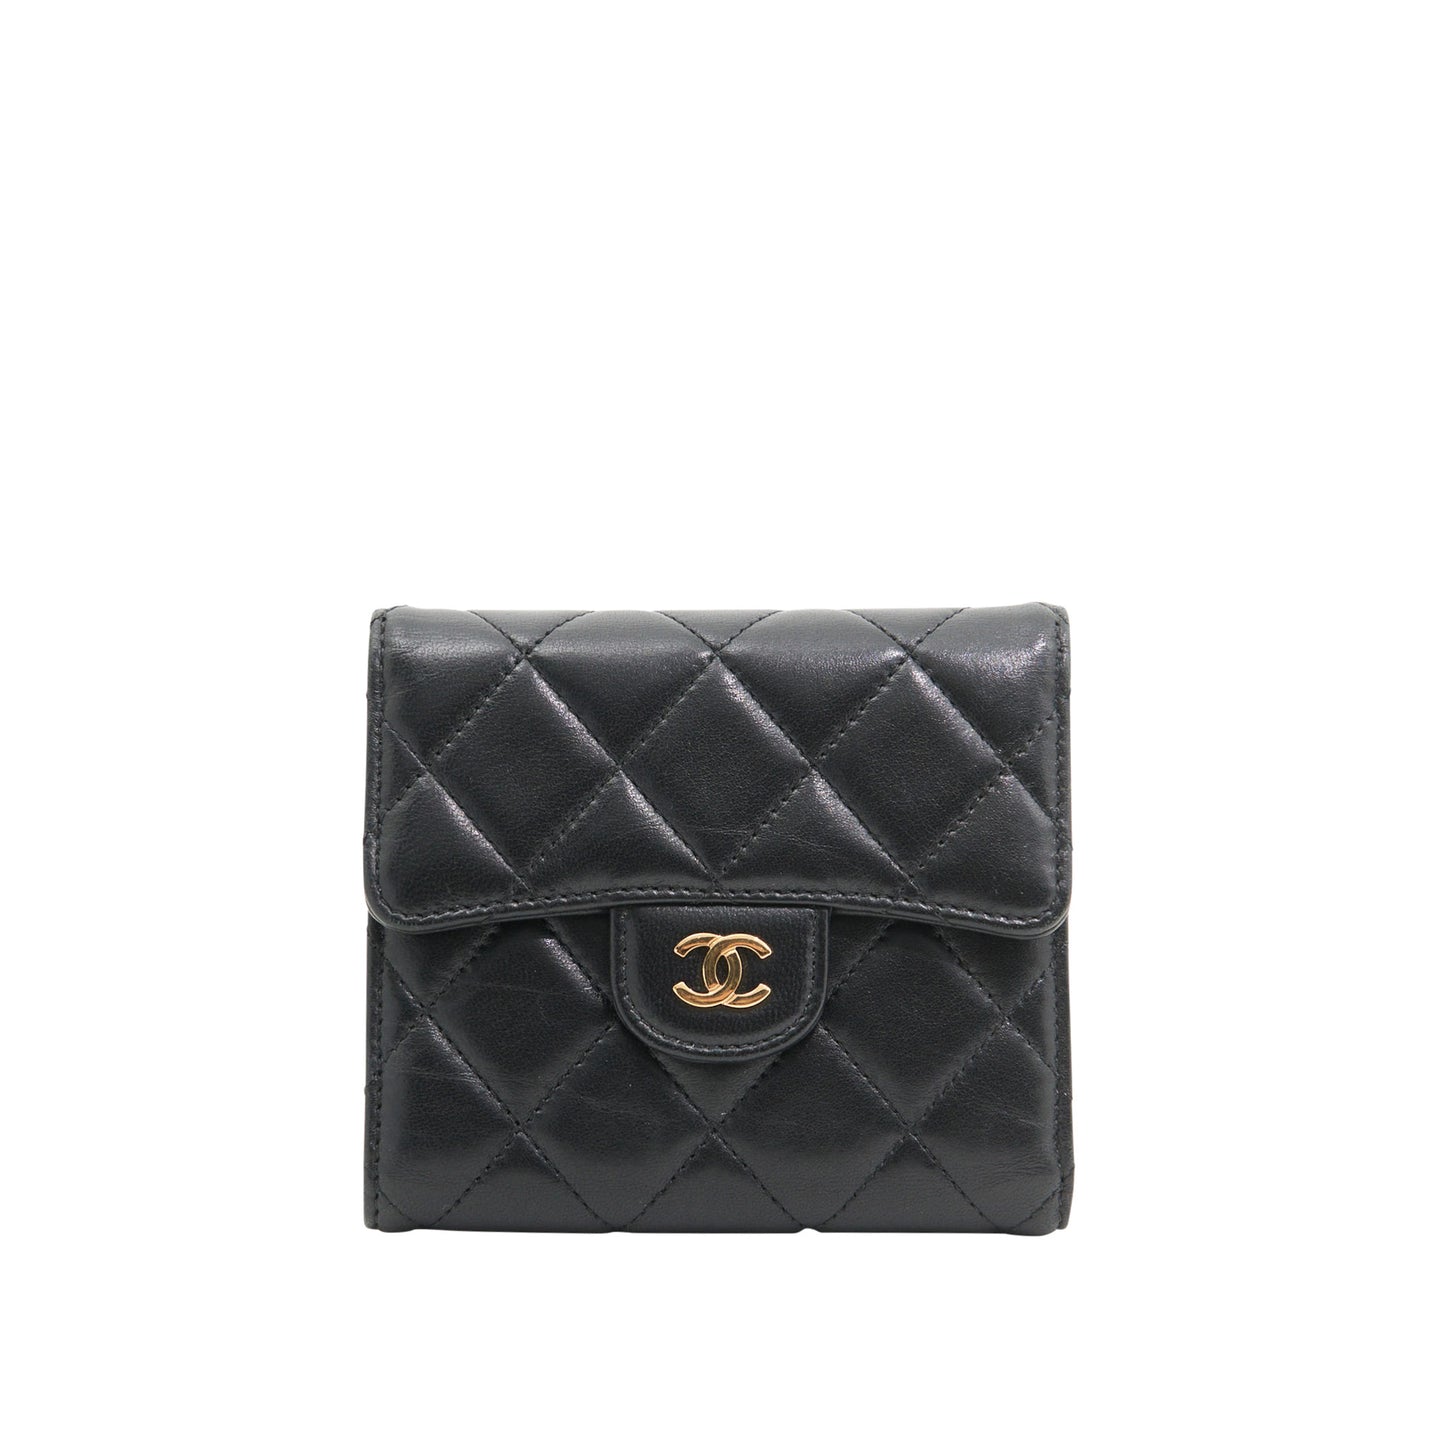 Chanel Lambskin Quilted Wallet in Black GHW